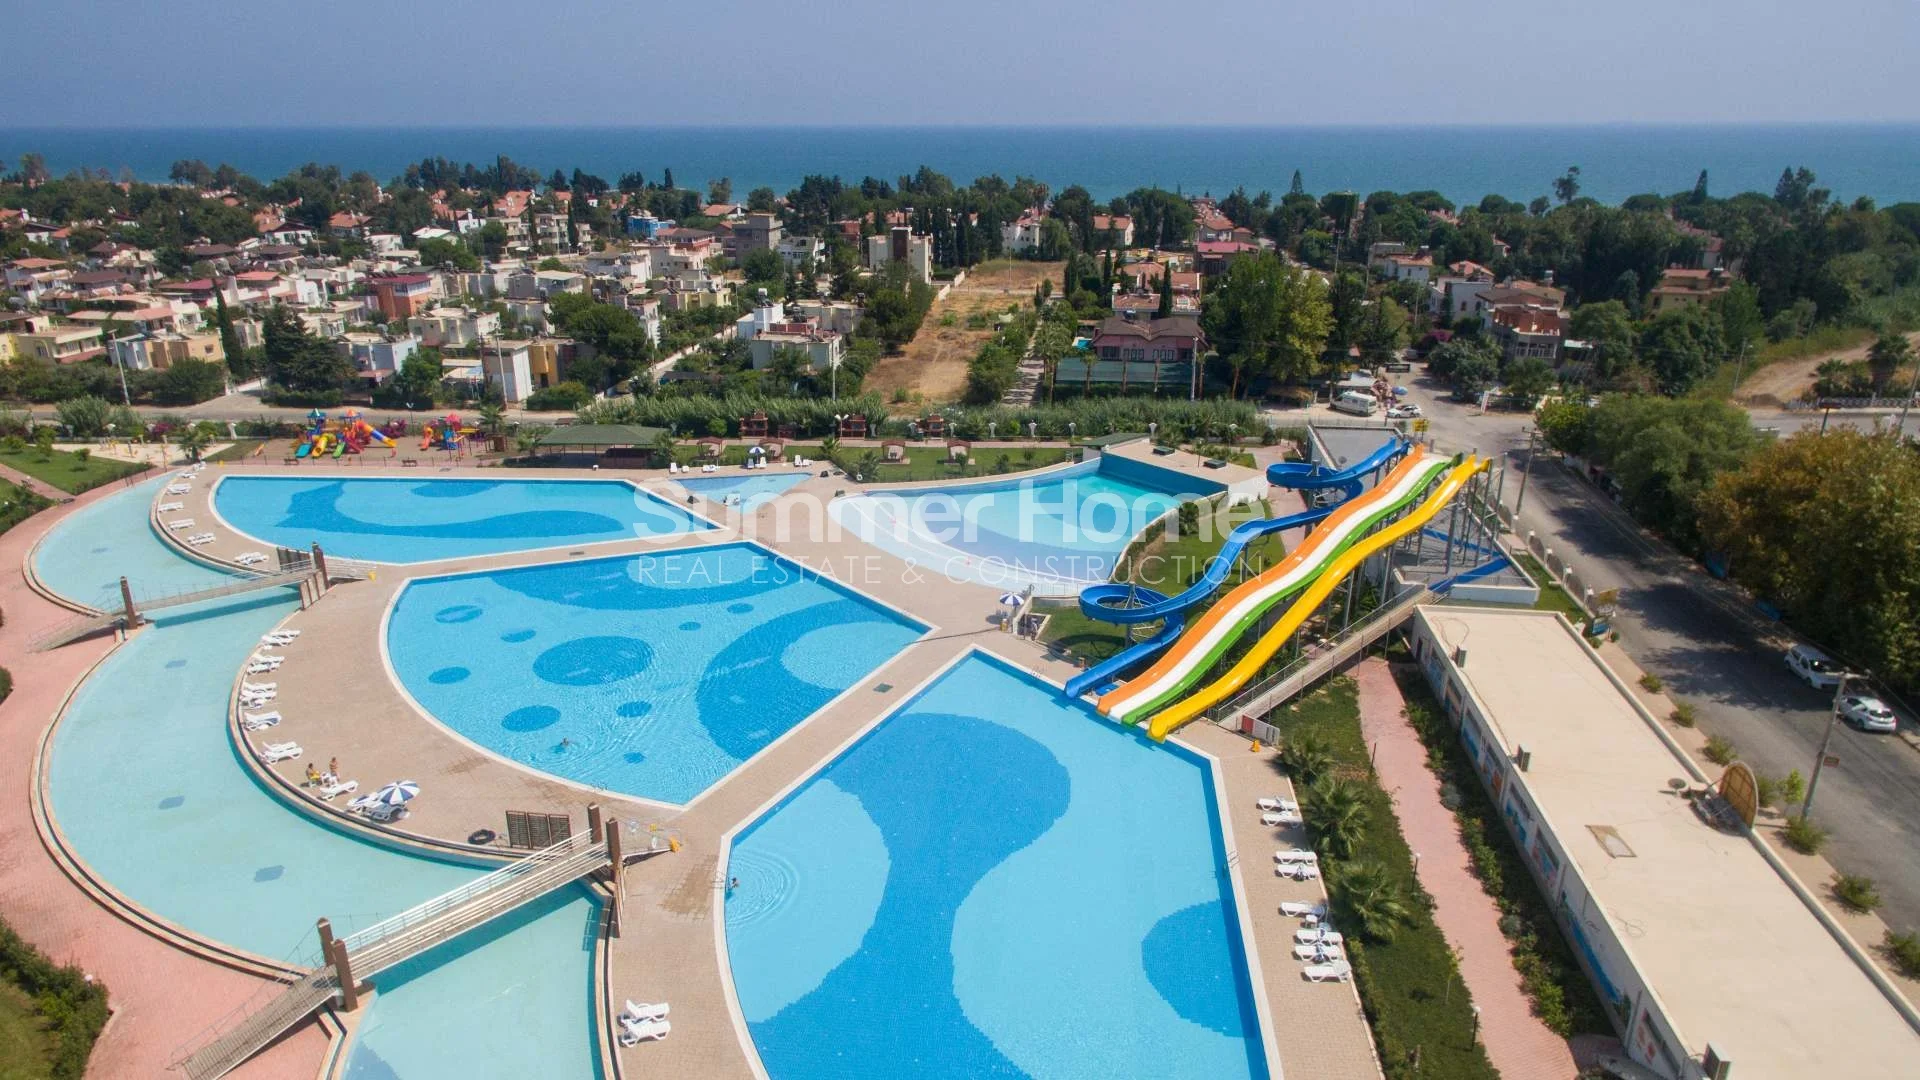 Holiday Apartments in Attractive Setting of Erdemli, Mersin General - 5